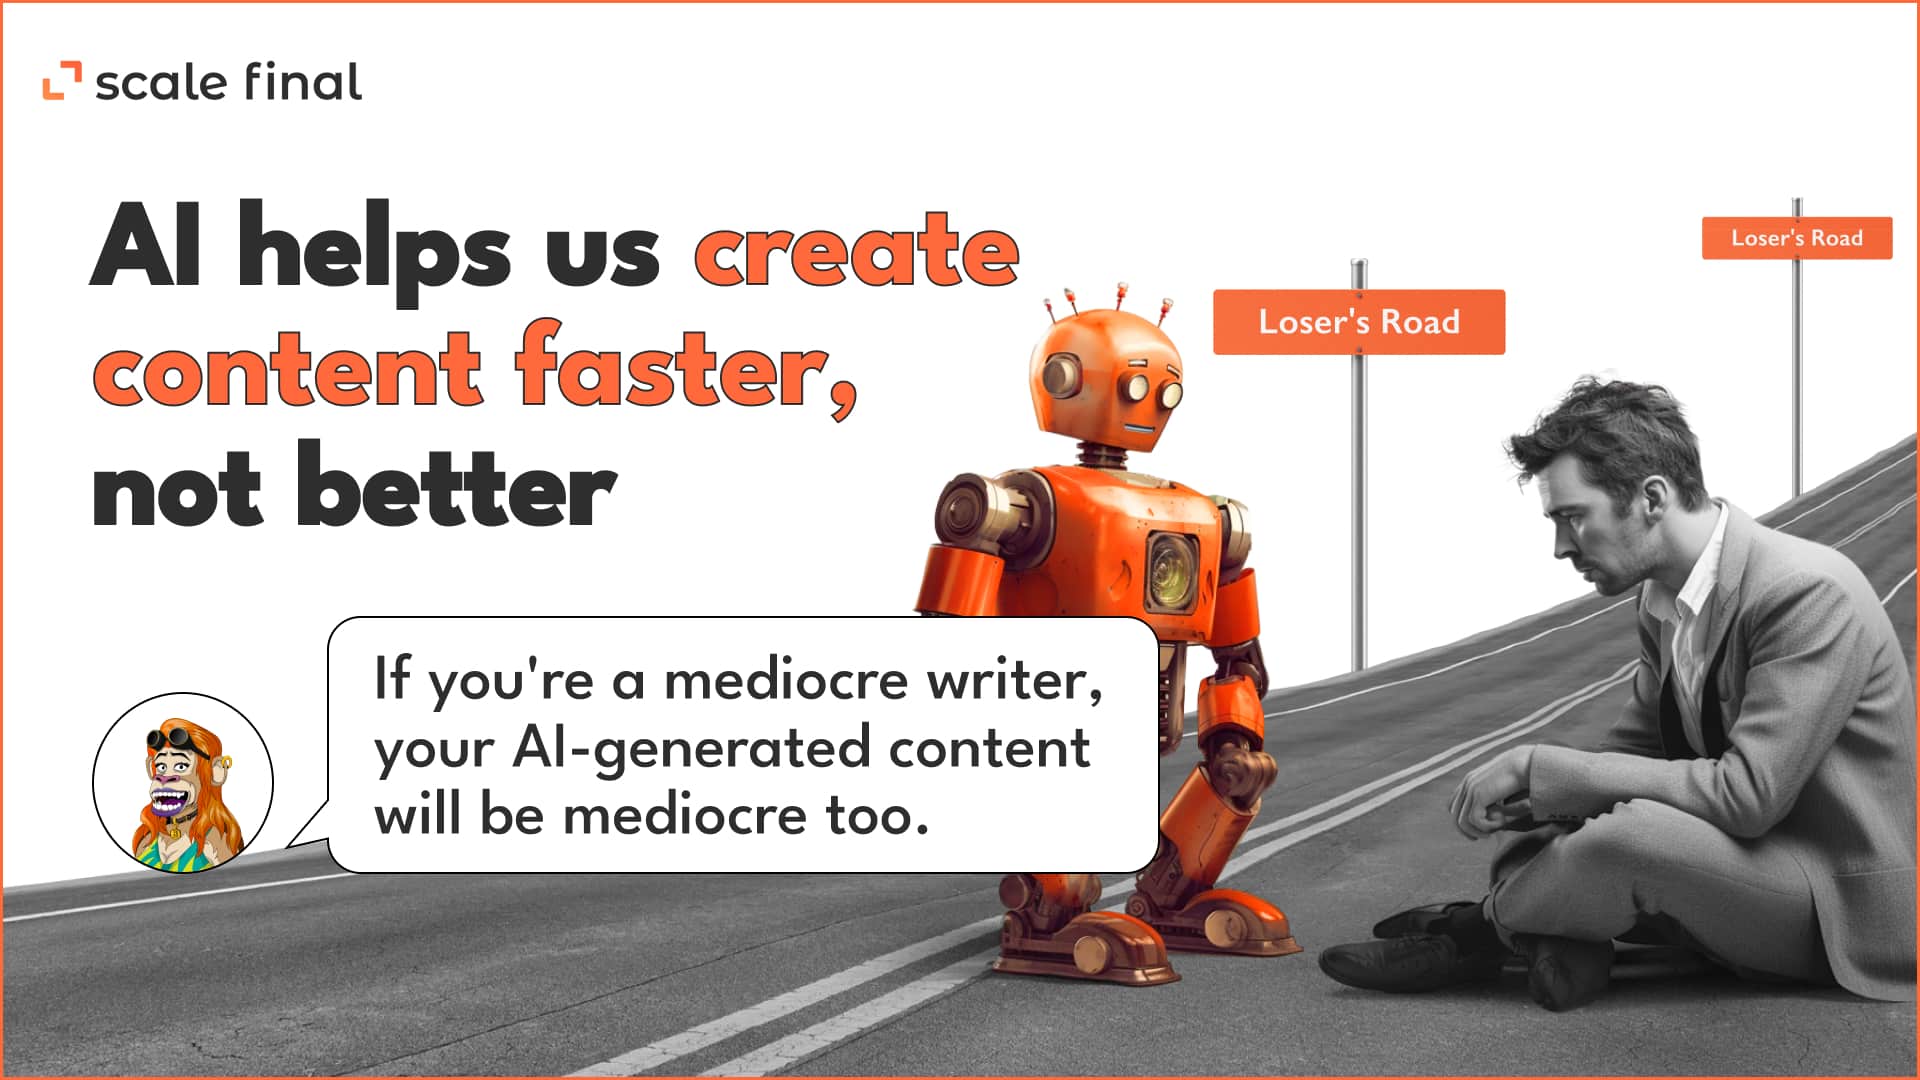 AI helps us create content faster, not better. If you're a mediocre writer, your AI-generated content will be mediocre too.